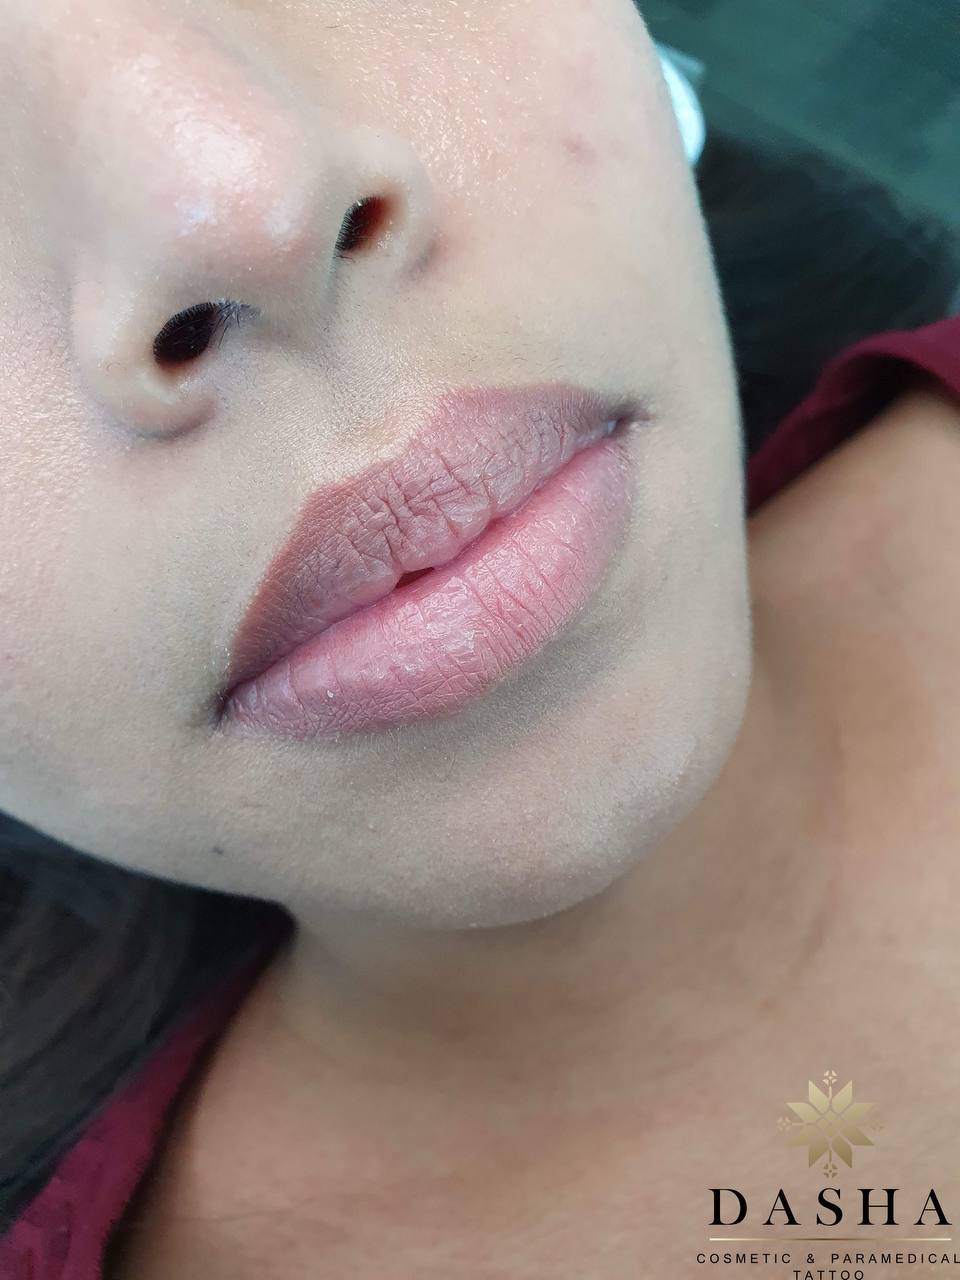 Dark Lip Neutralization Cosmetic Tattoo. Cosmetic and Mediical Tattoo by Dasha. Permanent makeup and reconstructive tattoo, scalp micro-pigmentation in Christchurch, New Zealand